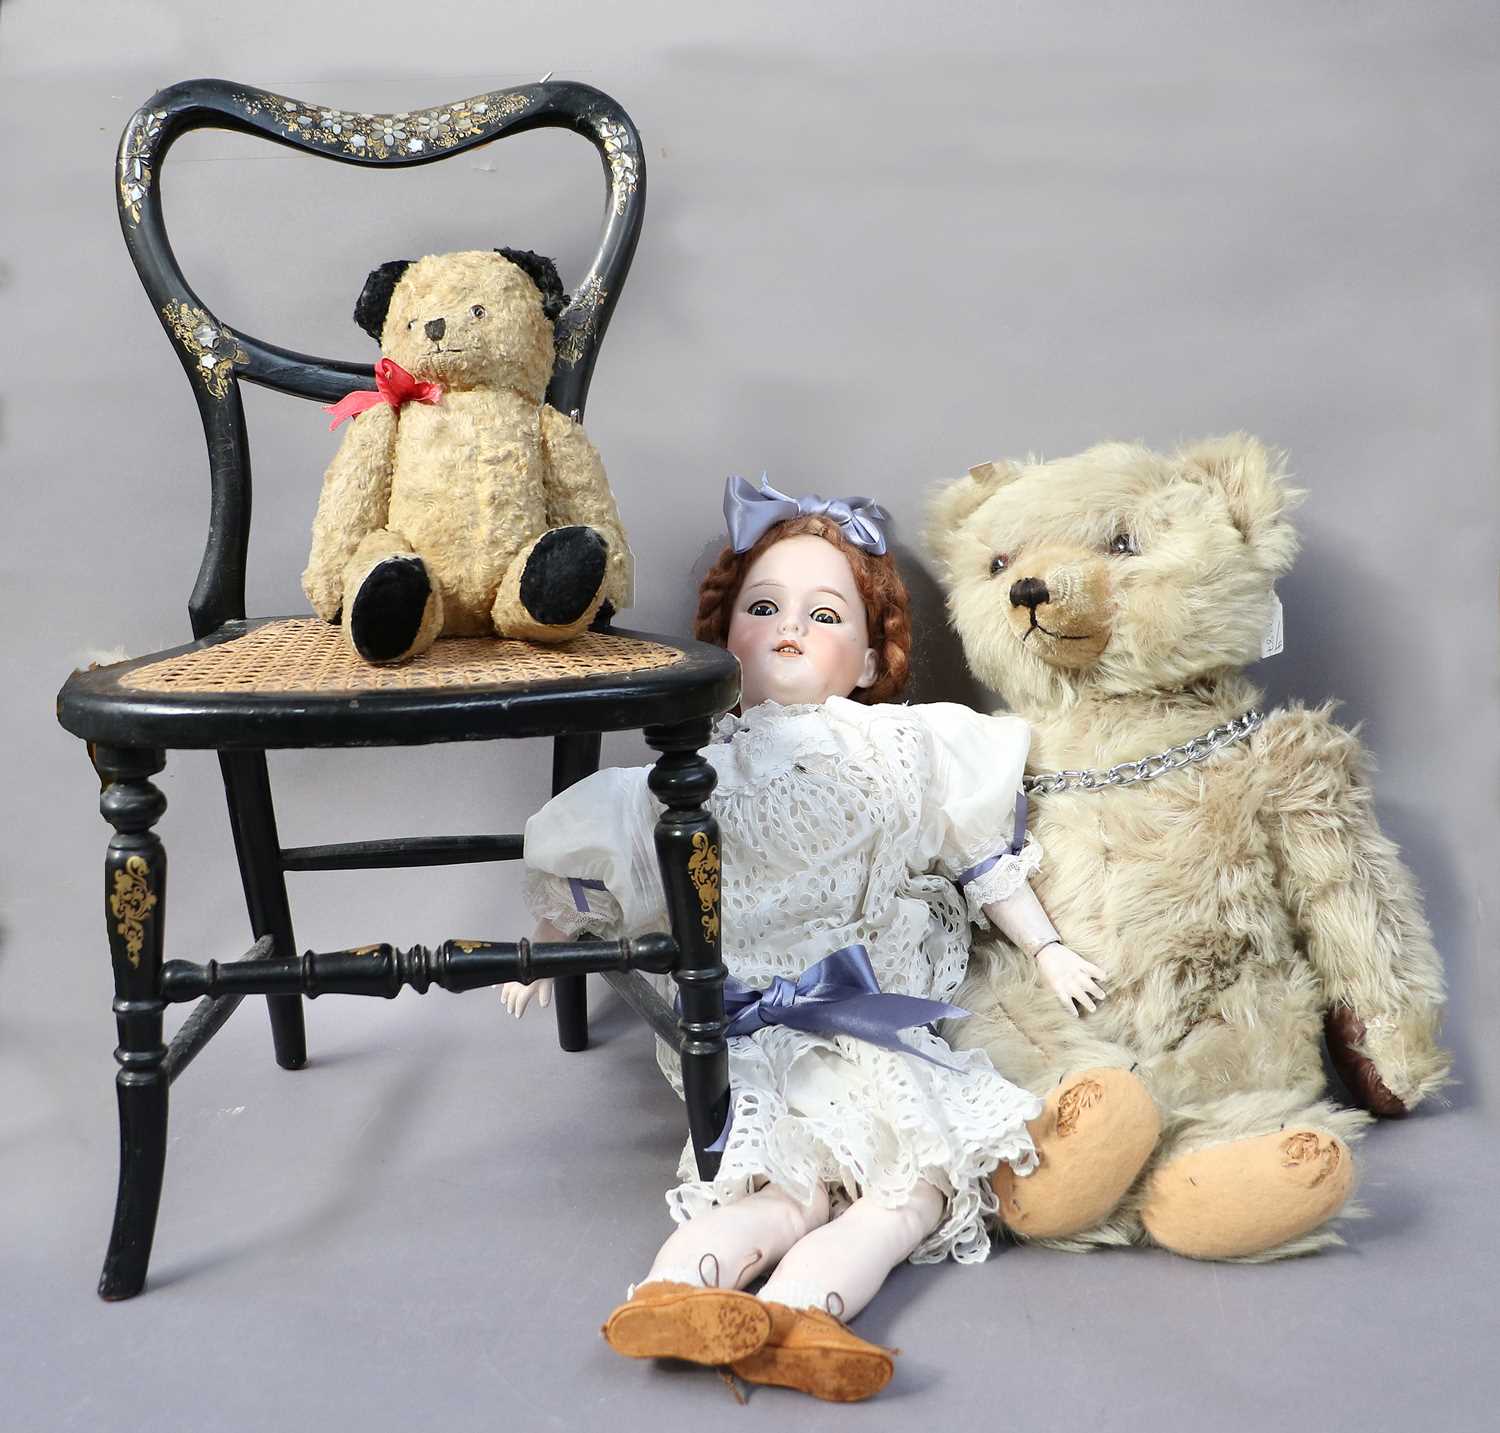 Circa 1930s Clemens German Jointed Teddy Bear, with felt pads to the feet, replacement leather